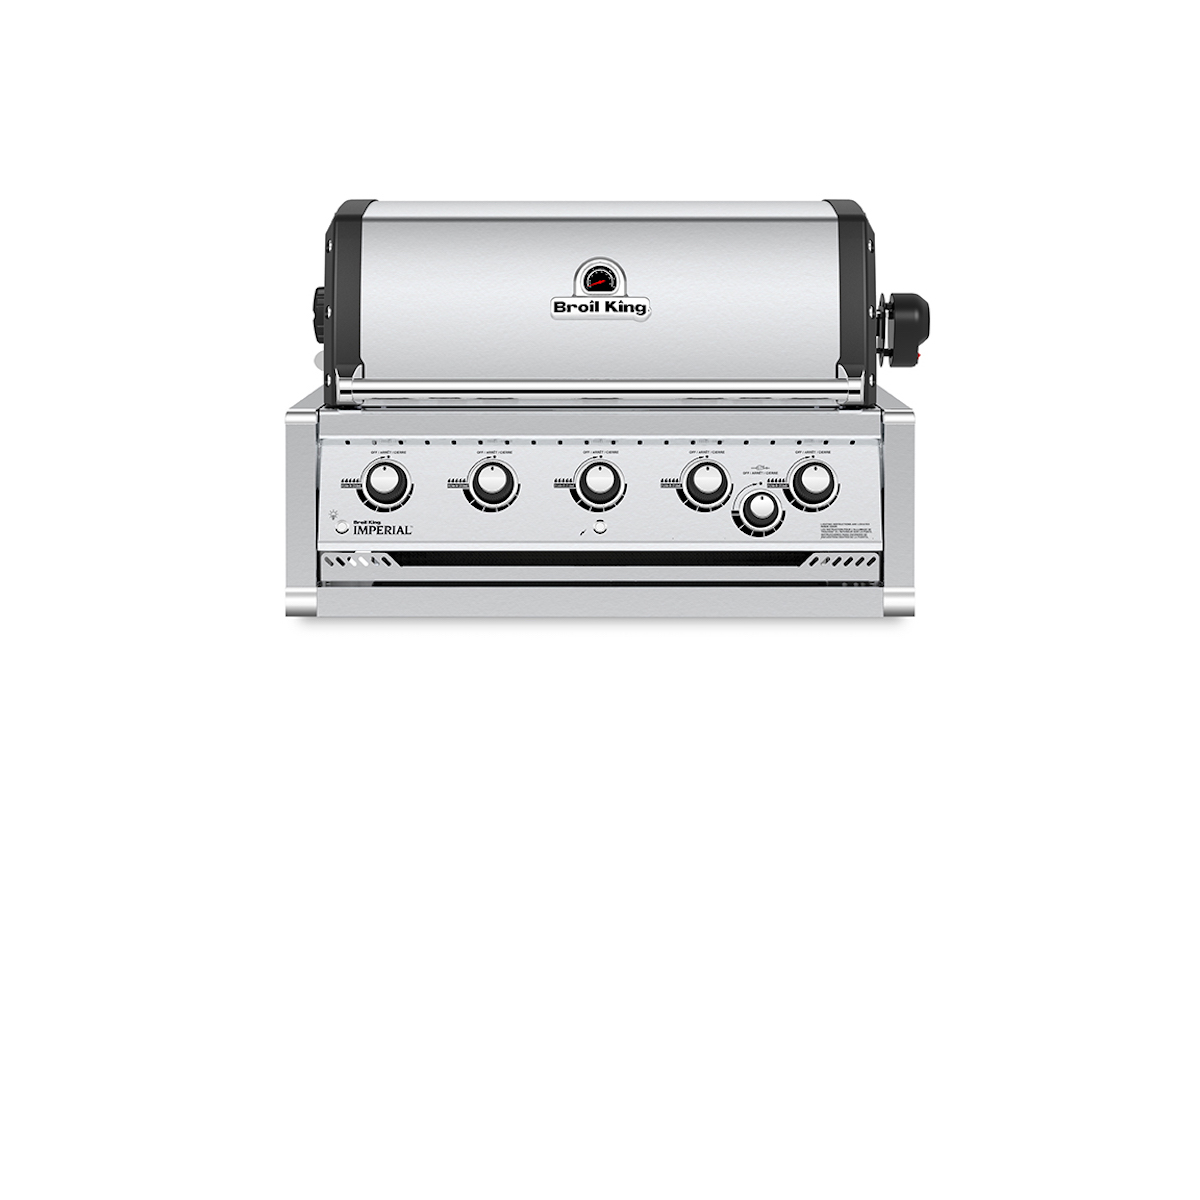 BROIL KING IMPERIAL S570 PRO Built In Gasgrill 